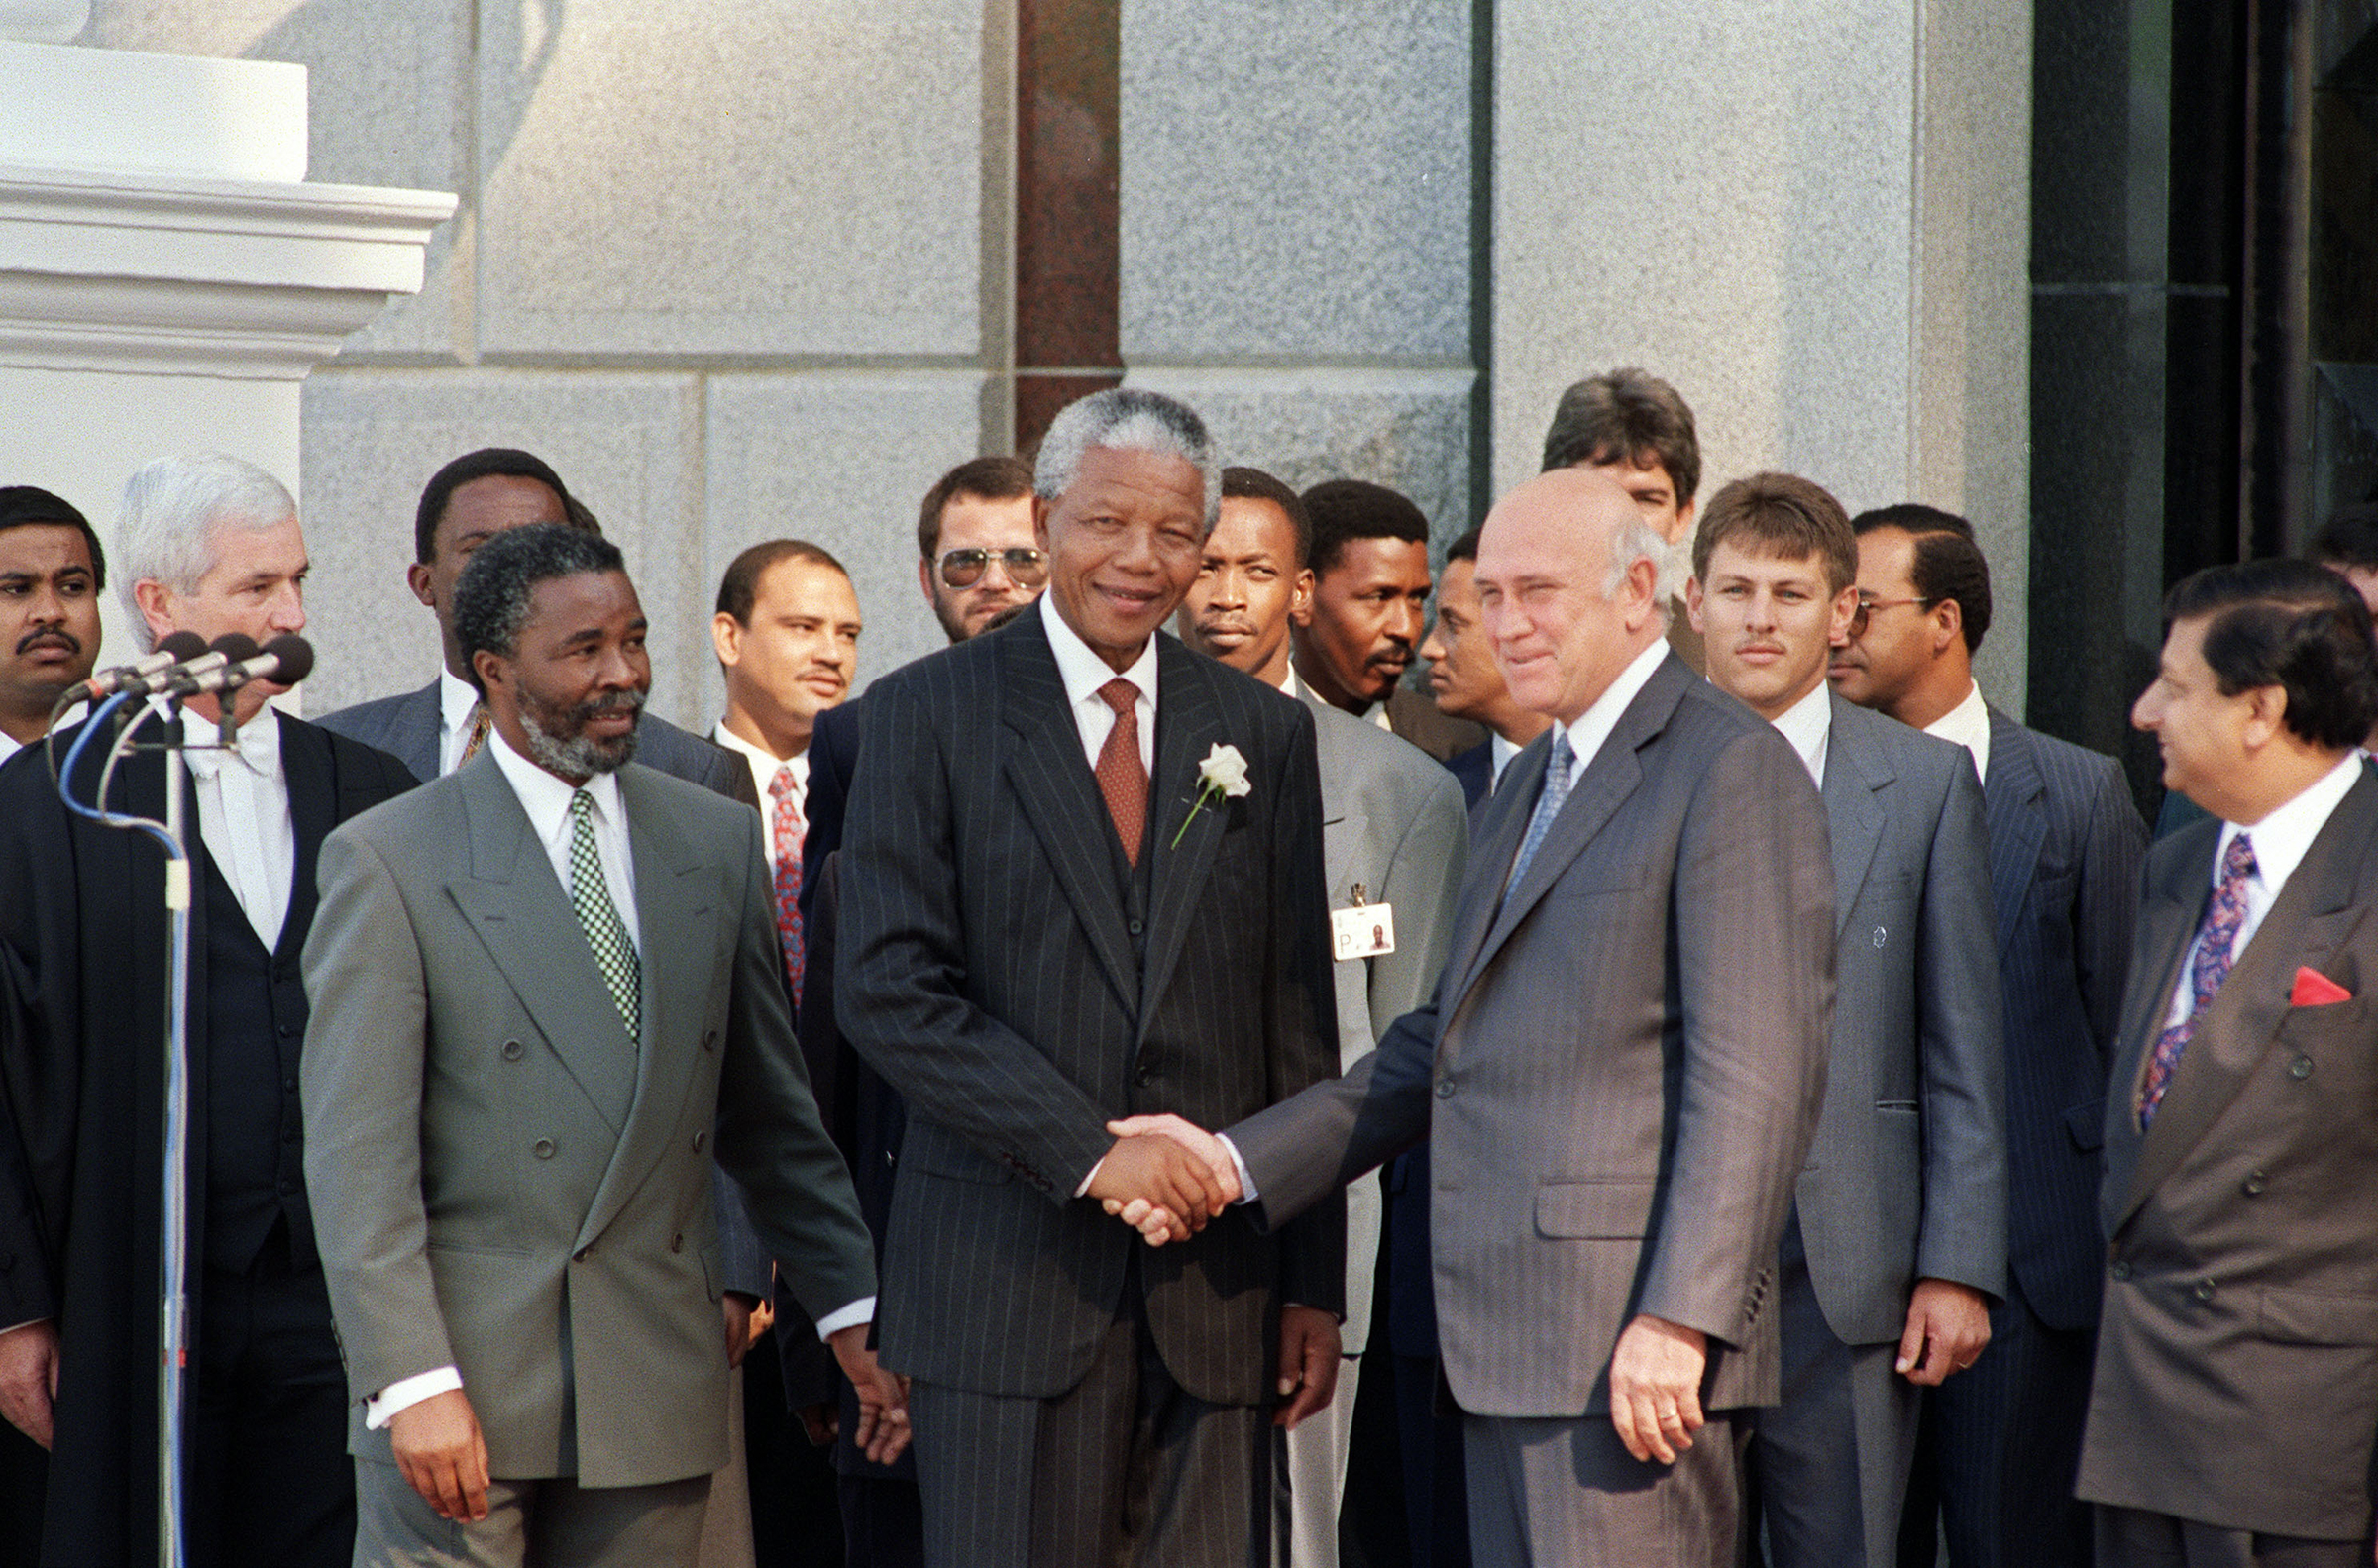 South African President Nelson Mandela shakes hands with F.W. de Klerk, the former president and one of Mandela's deputy presidents, after the inaugural sitting in May 1994